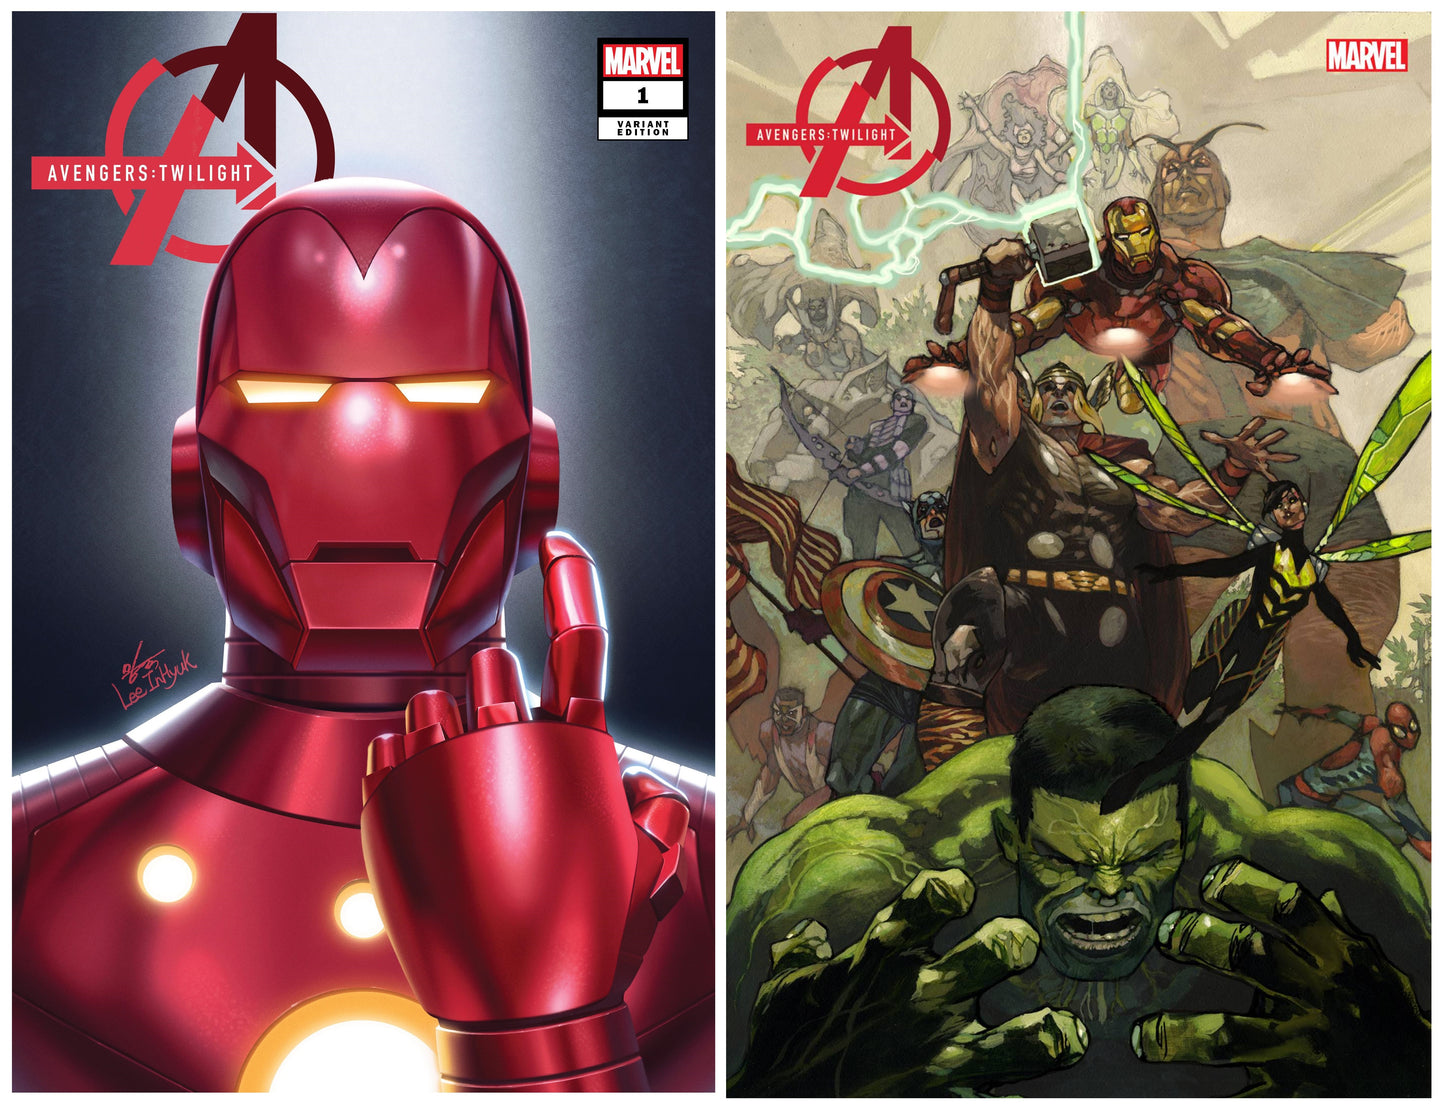 AVENGERS TWILIGHT #1 INHYUK LEE VARIANT LIMITED TO 500 COPIES WITH NUMBERED COA + 1:60 VARIANT